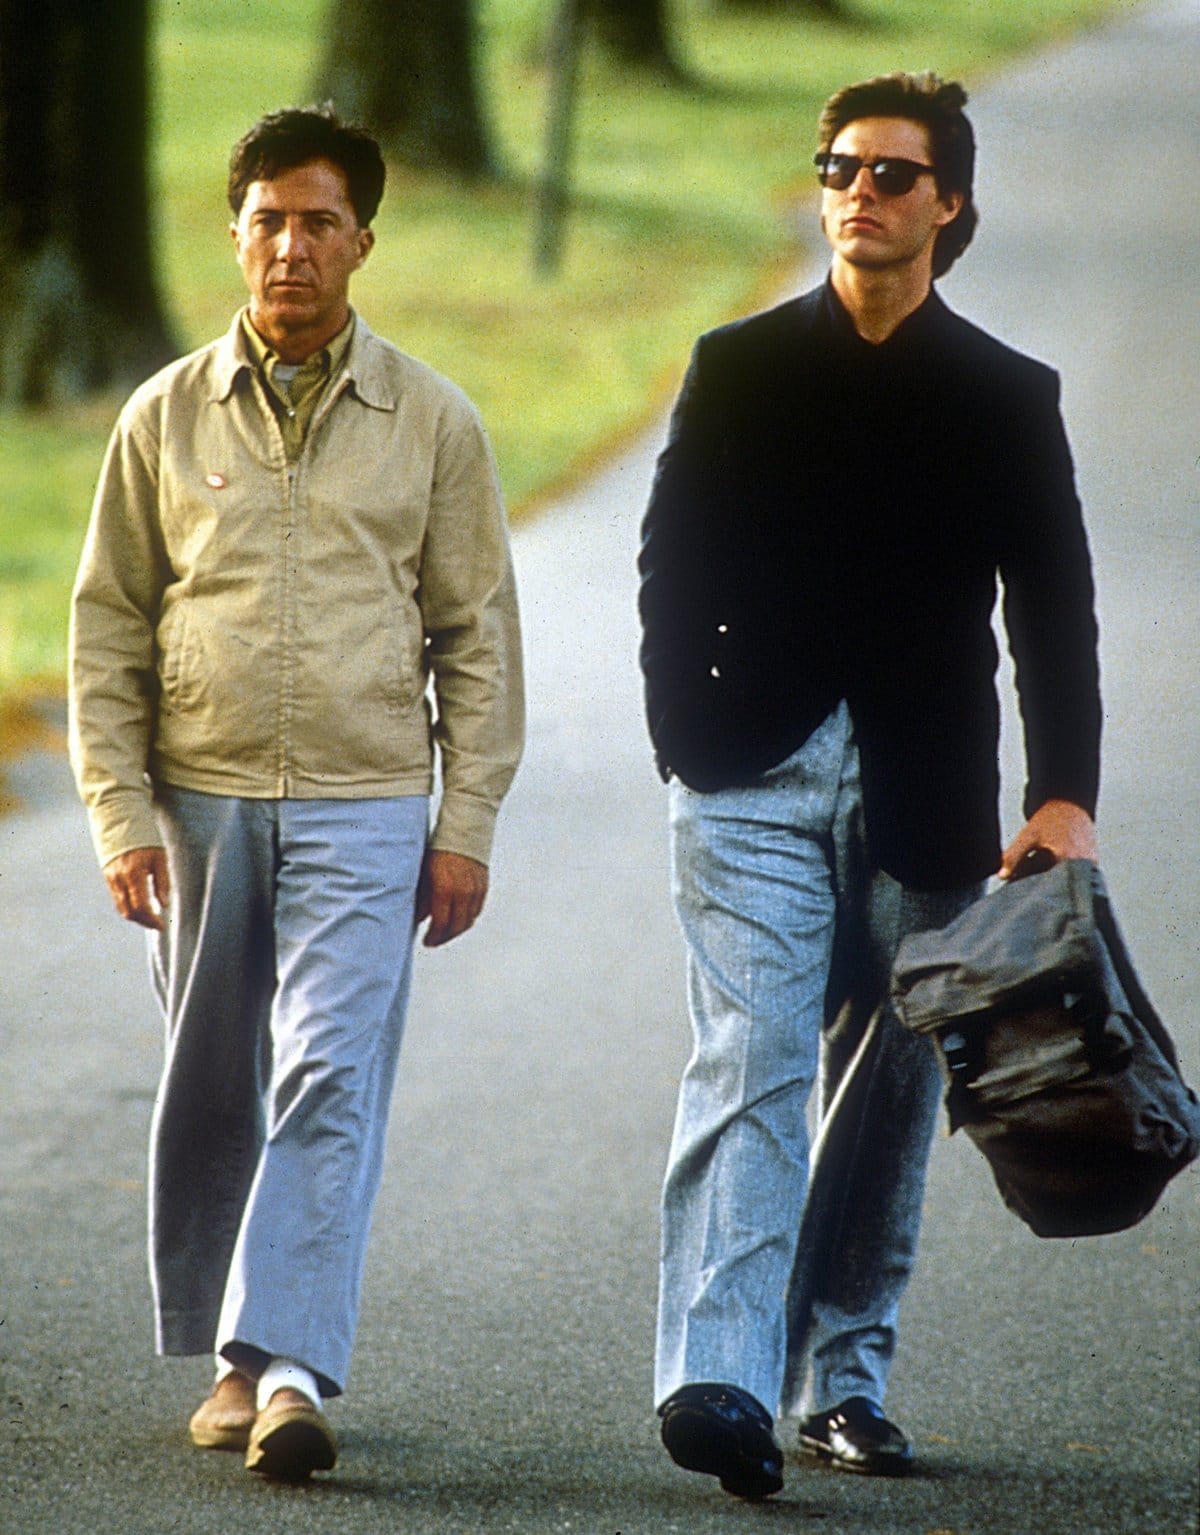 Dustin Hoffman was 51 years old and Tom Cruise was 26 years old when the 1988 American road drama film Rain Man was released in the United States on December 16, 1988